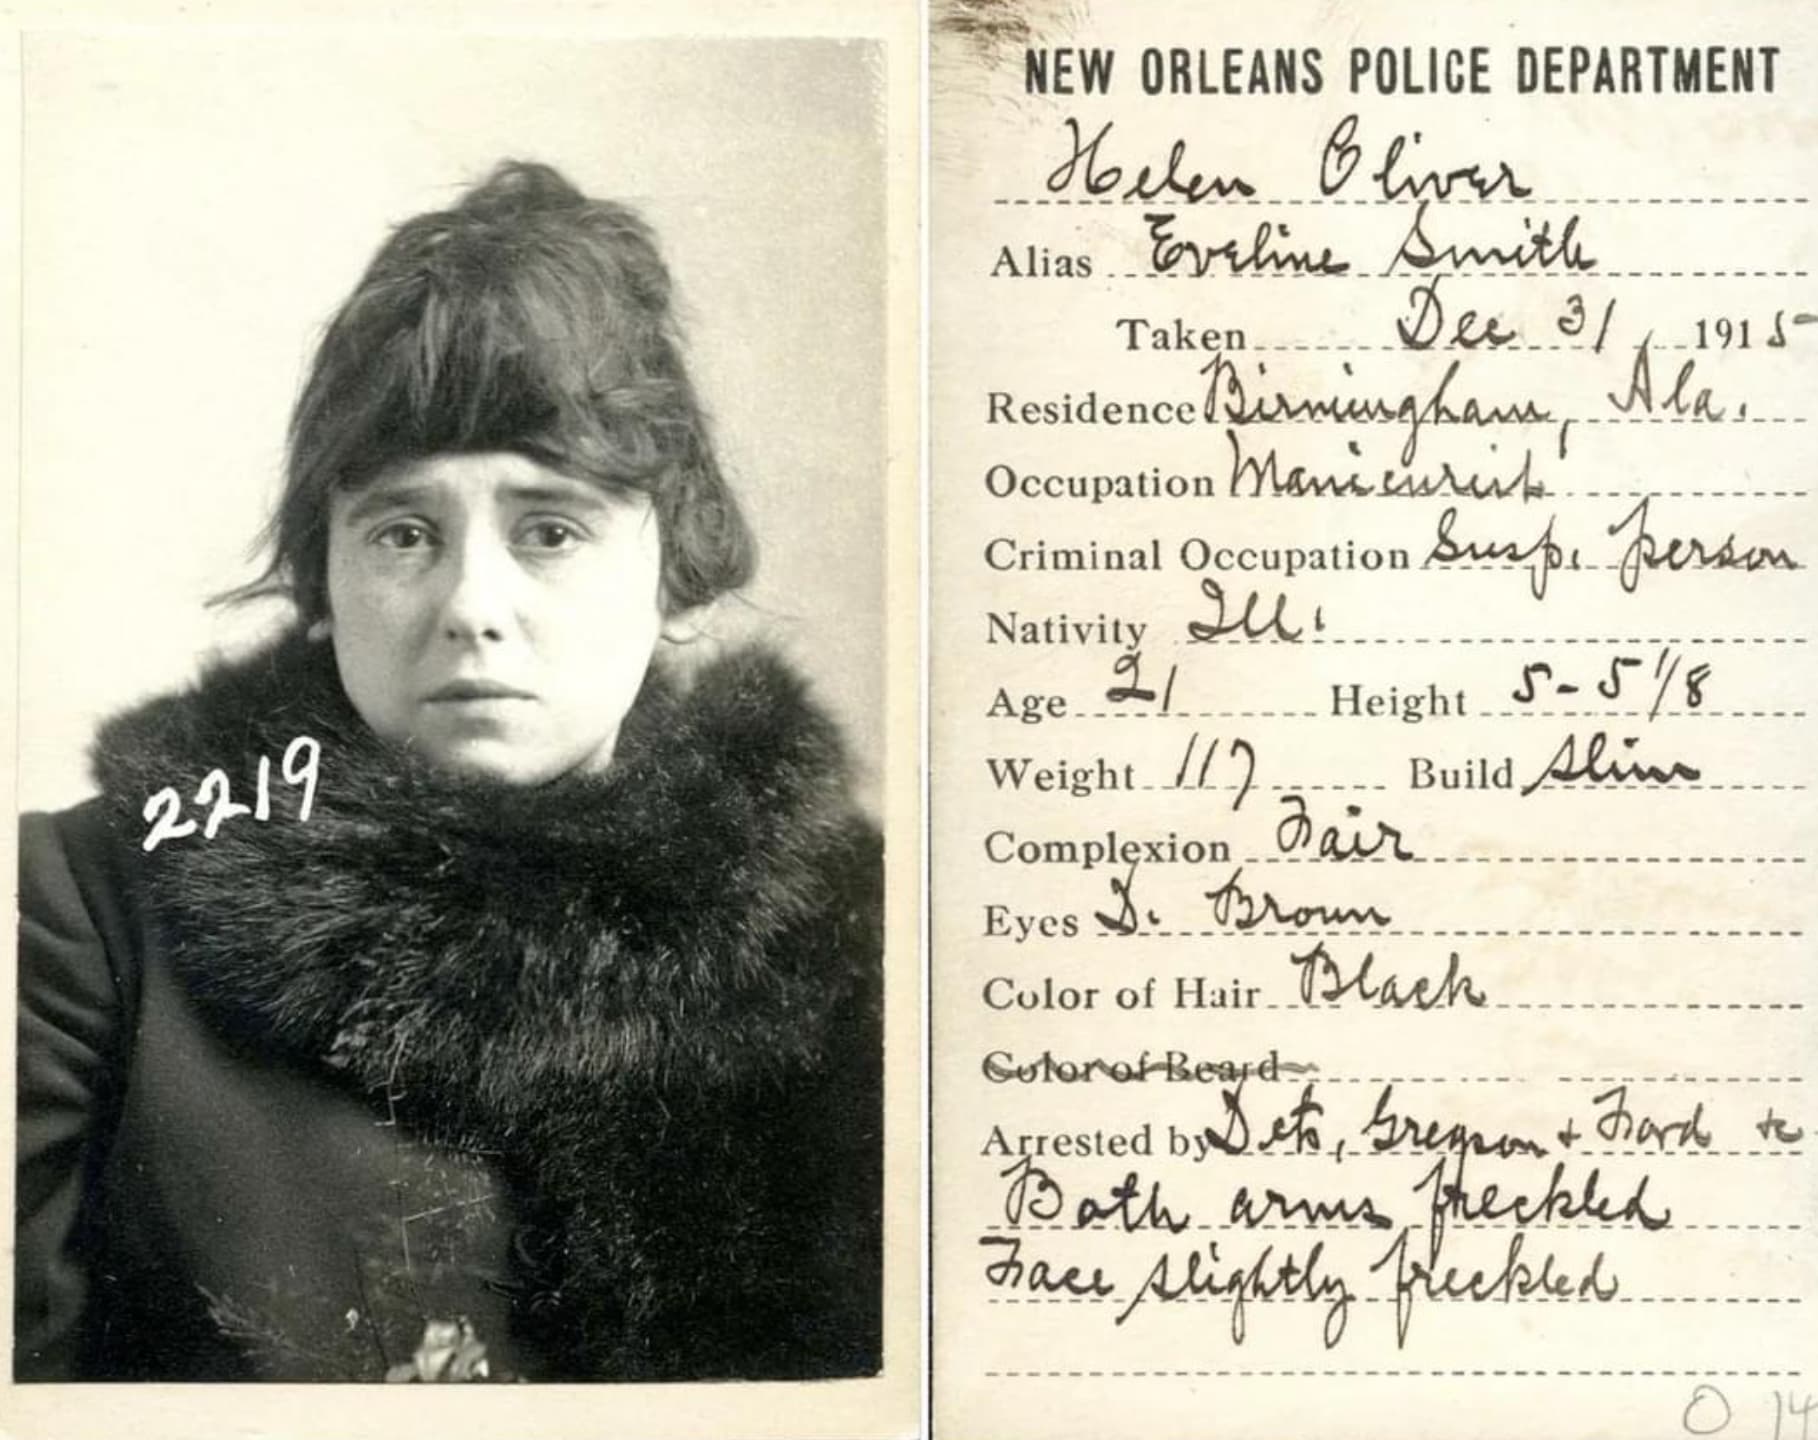 handwriting - New Orleans Police Department Helen Oliver Alias Eveline Smith Taken. S Residence Birmingham, Ala. Occupation Manicures! Criminal Occupation Susp. person 2219 Nativity zu 21 Age. Height 5518 Weight 117 Build Alim Complexion Dair Eyes D. Brow